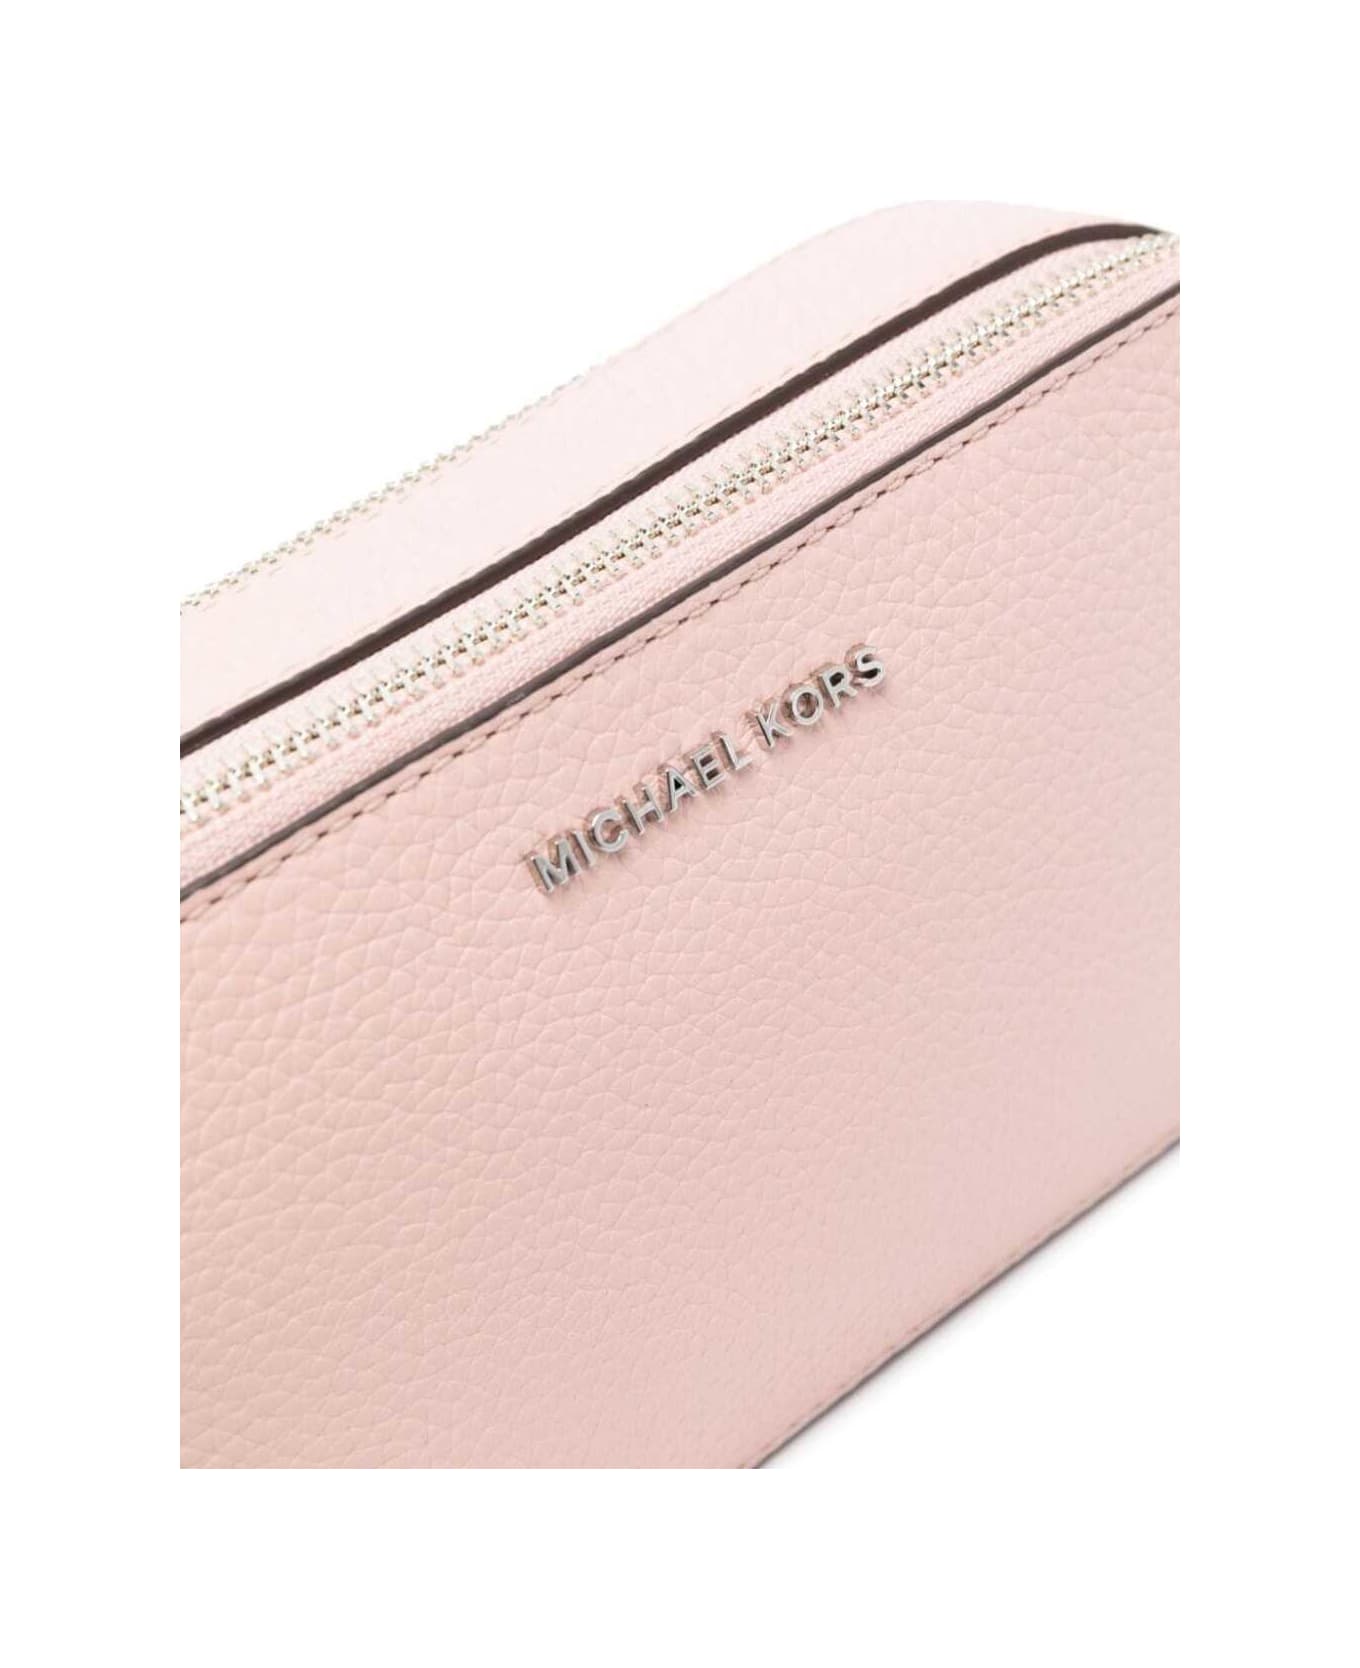 MICHAEL Michael Kors Pink Pouch With Chain And Logo Detail In Hammered Leather Woman - Pink